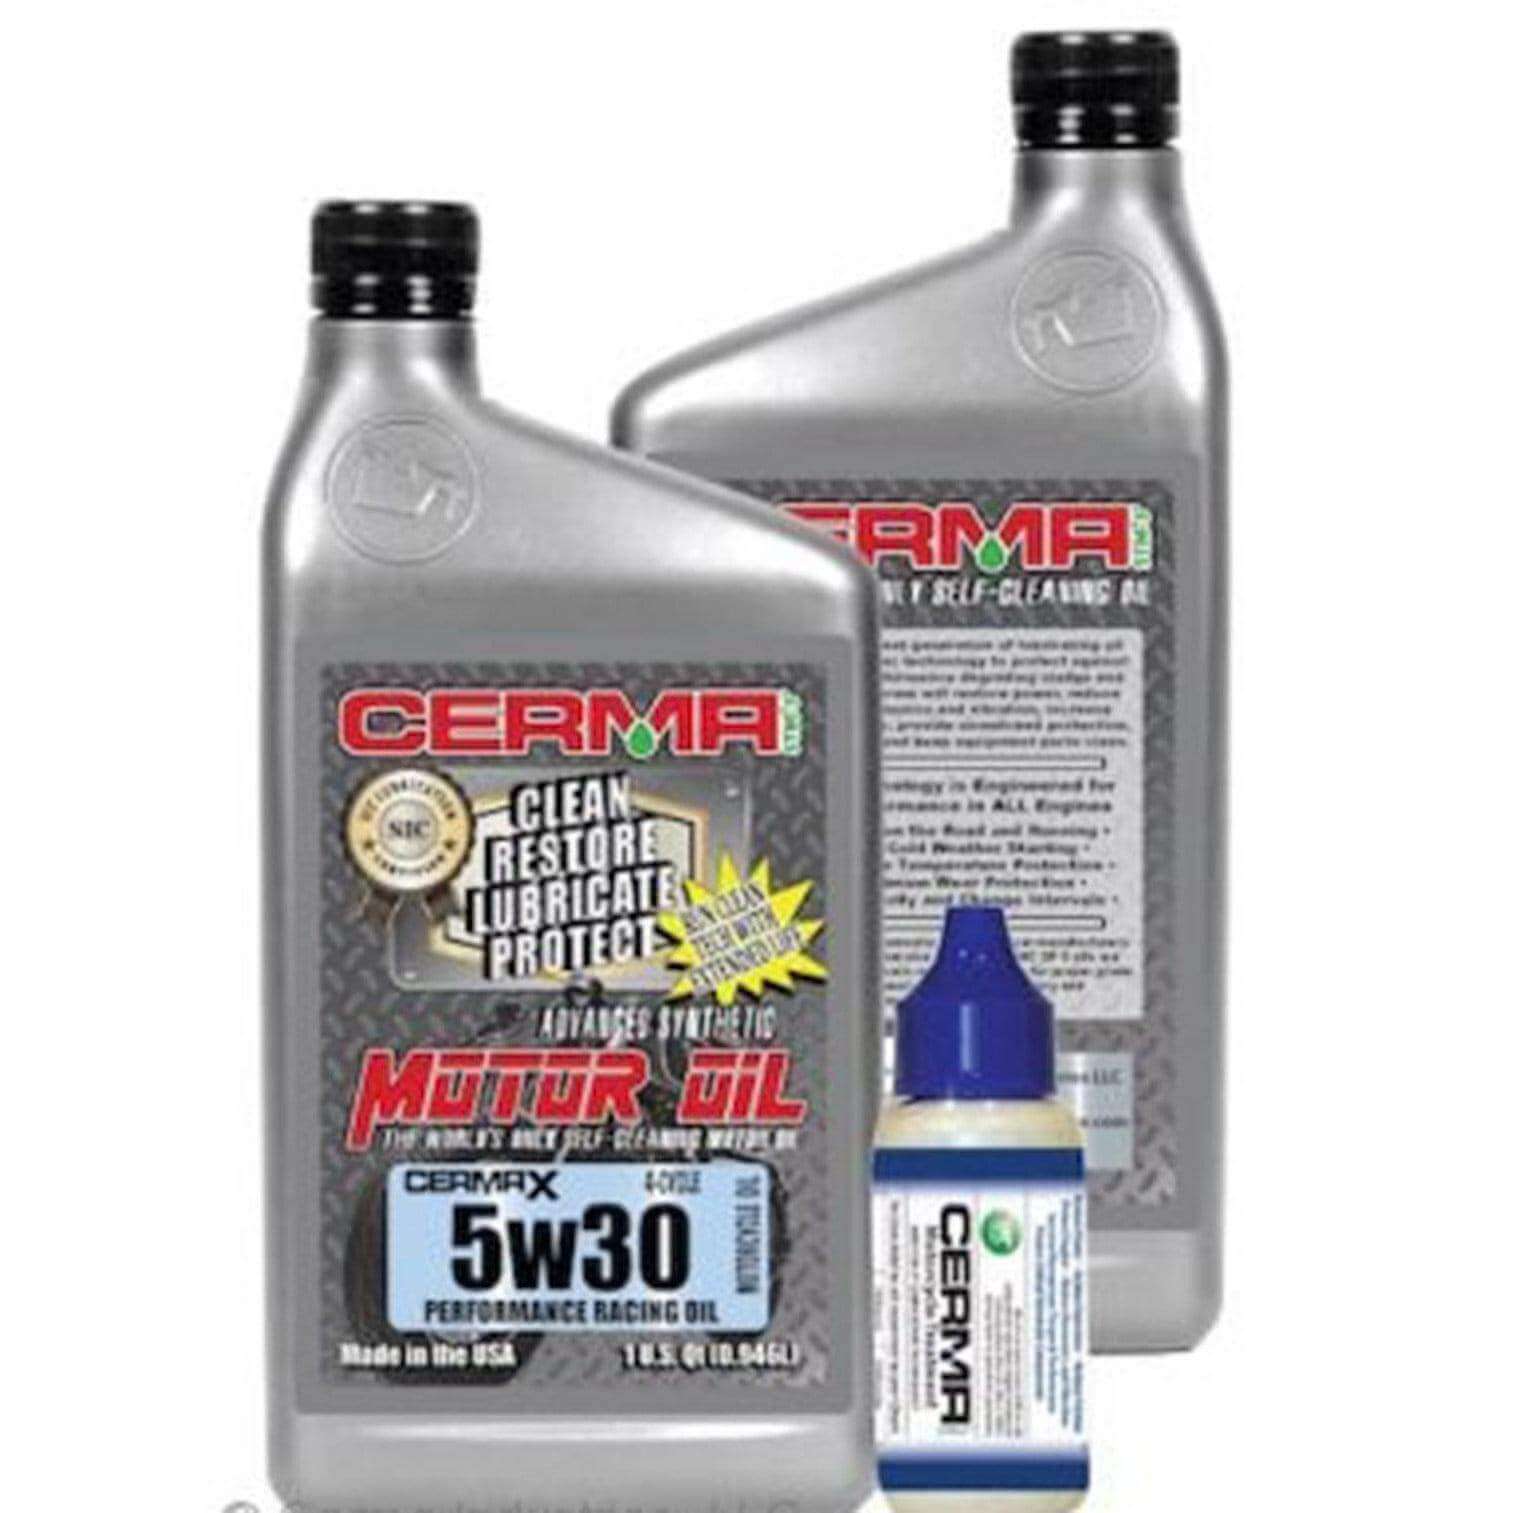 Cerma Ceramic Synthetic Oil Value Package for Motorcycles at $88 only from cermatreatment.com